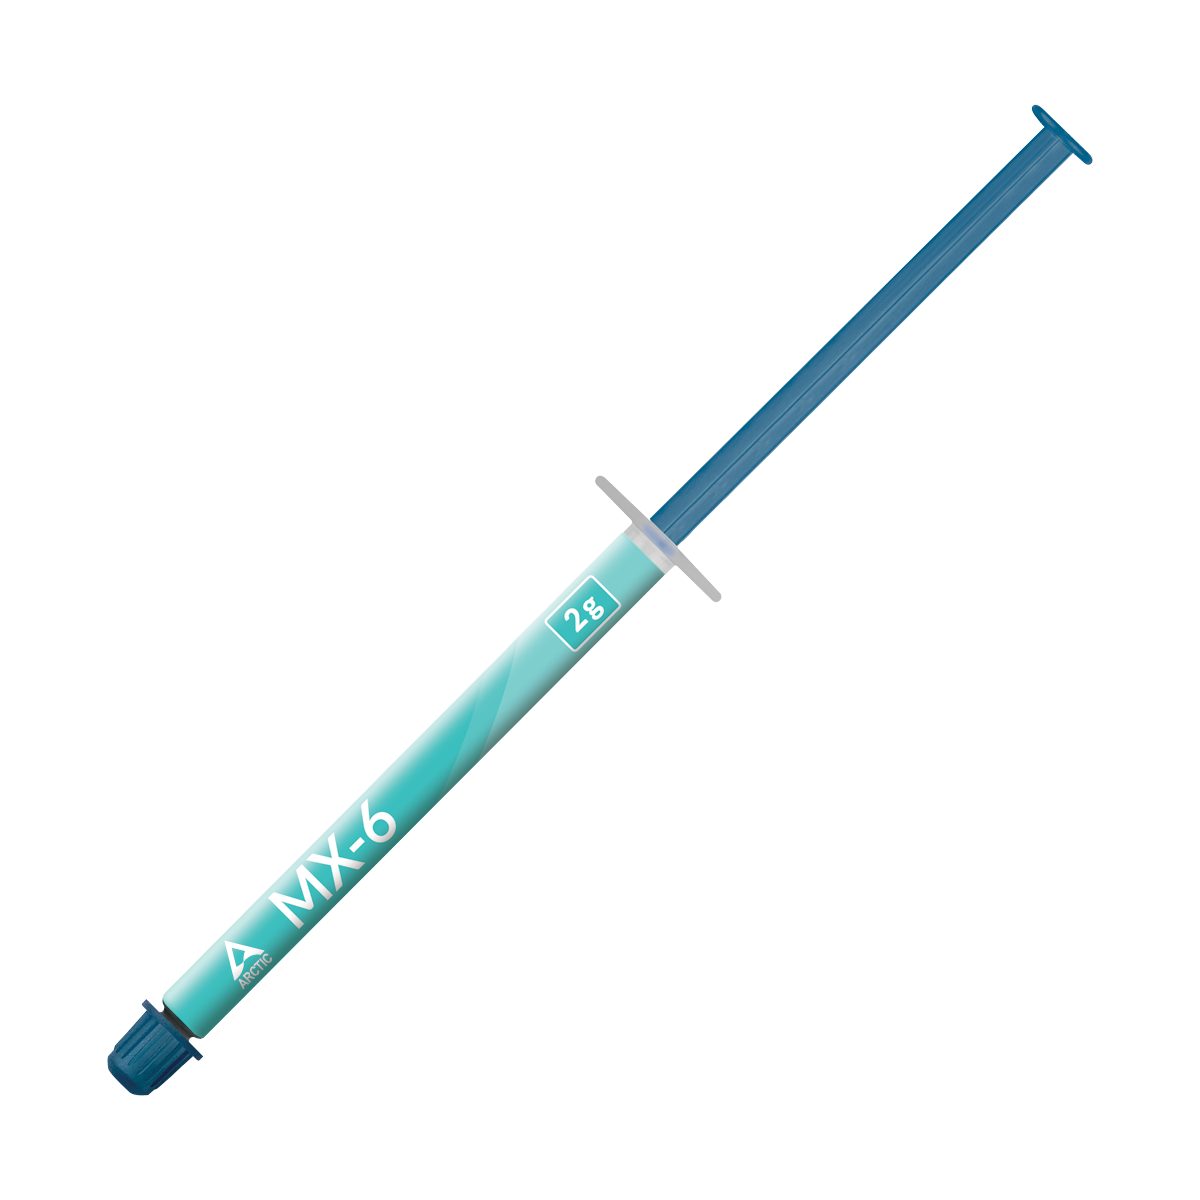 ARCTIC MX-6 2g - High Performance Thermal Compound (thermal paste) - Arctic 2.35.64.01.028